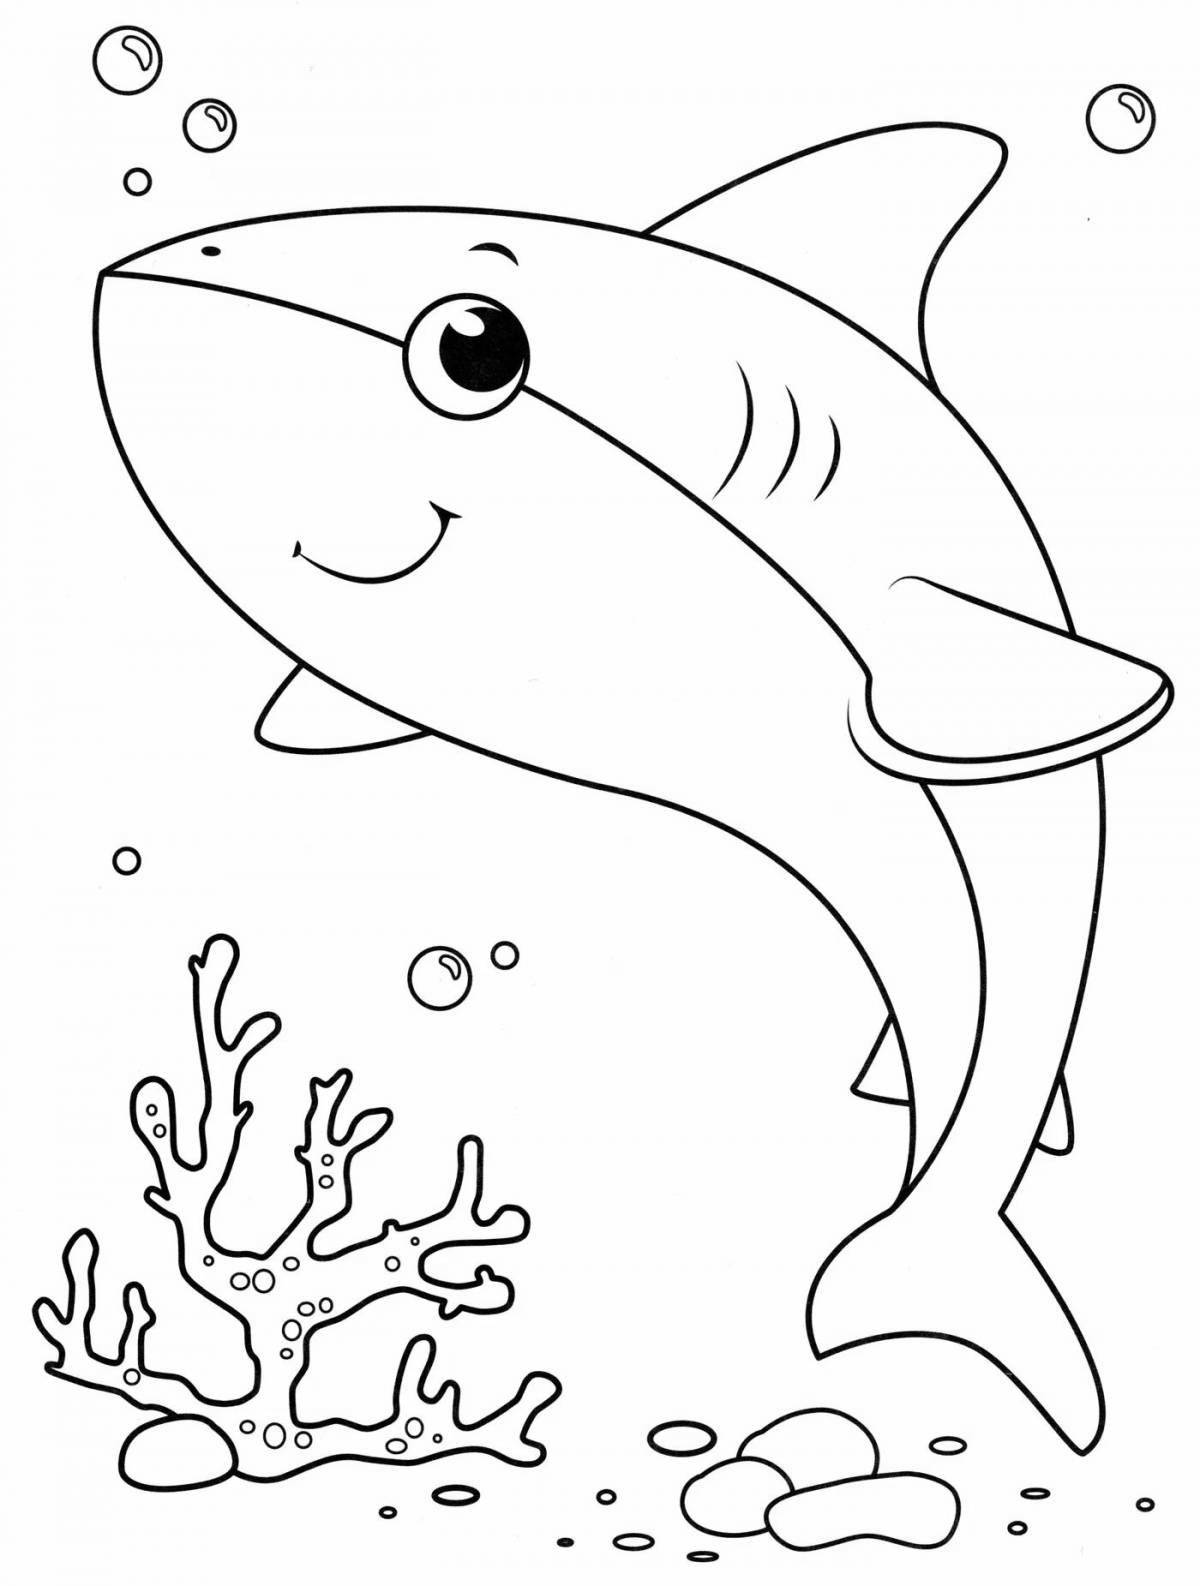 Playful shark coloring page